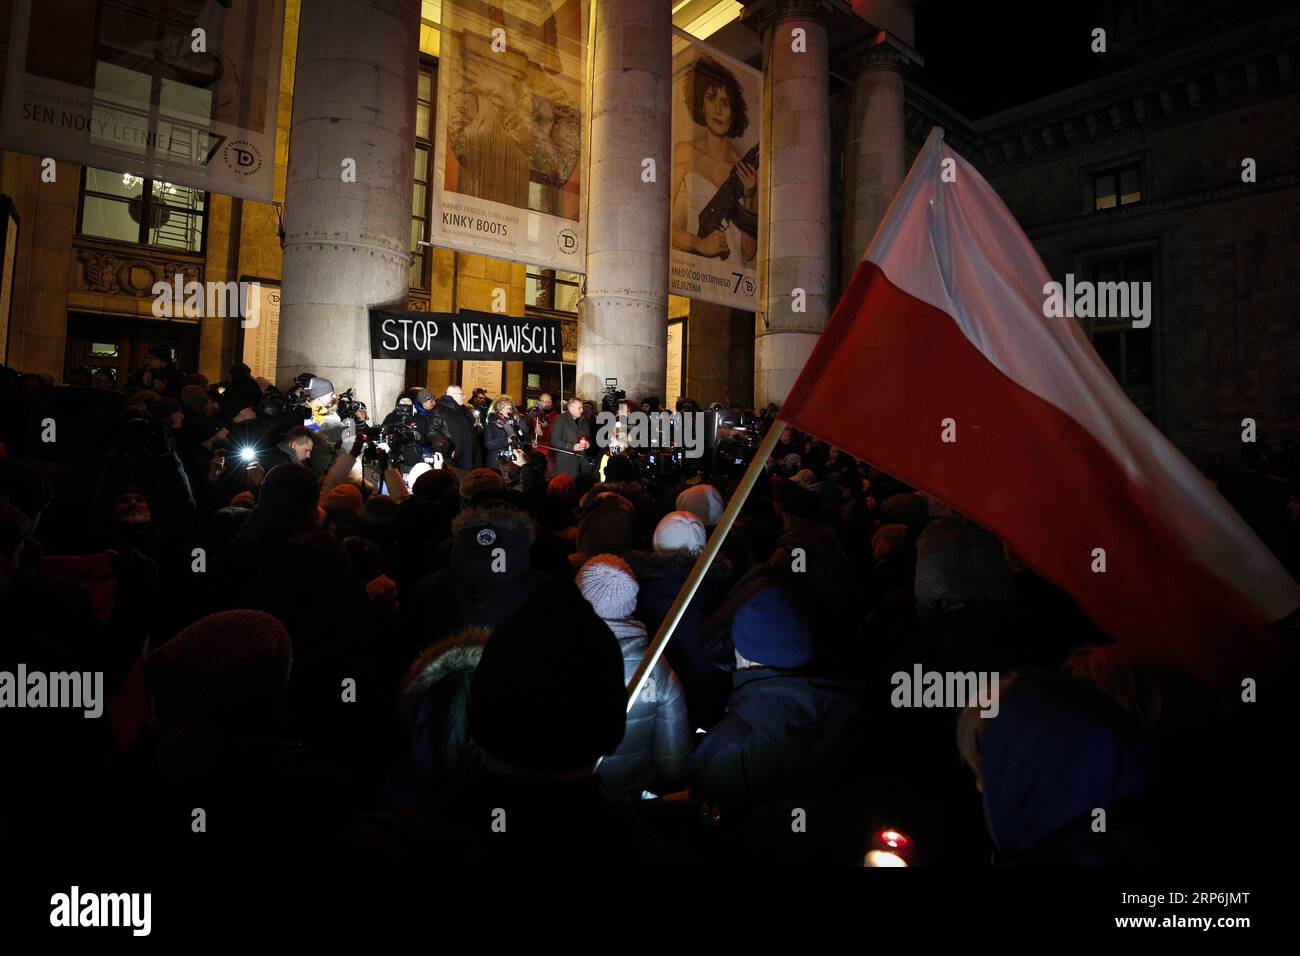 (190115) -- WARSAW, Jan. 15, 2019 -- People hold a banner saying stop hating during a march in commemoration of Pawel Adamowicz, the late Mayor of the Polish port city of Gdansk, in center of Warsaw, Poland, Jan. 14, 2018. The UN refugee agency, UNHCR, said Monday it is deeply shocked and saddened to hear that Pawel Adamowicz has died after being stabbed at a charity event. Adamowicz launched the Gdansk Immigrant Integration Model in 2016, a model that has inspired other Polish cities, said the UN agency. The agency wrote in February 2018 that the Gdansk Model is a comprehensive program to hel Stock Photo